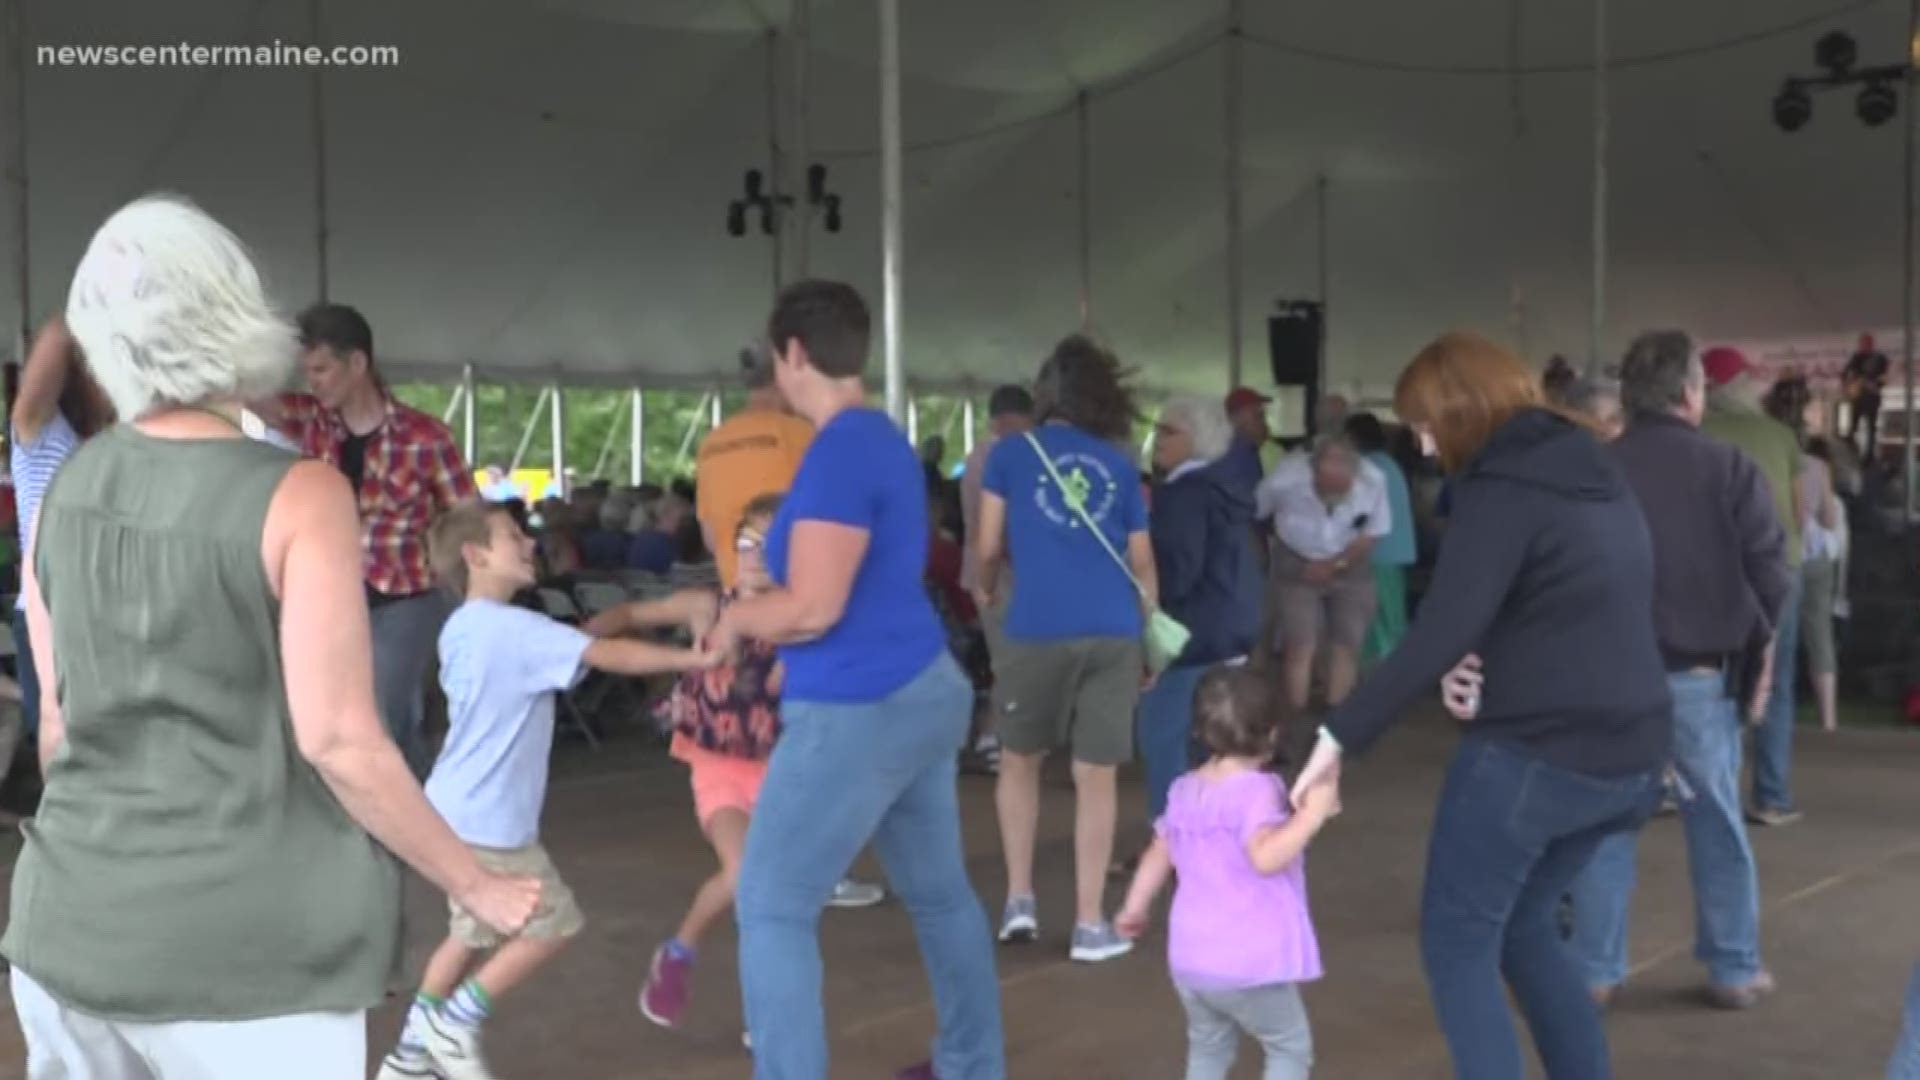 For one person, the dance floor at the American Folk Festival holds a whole lot of meaning.